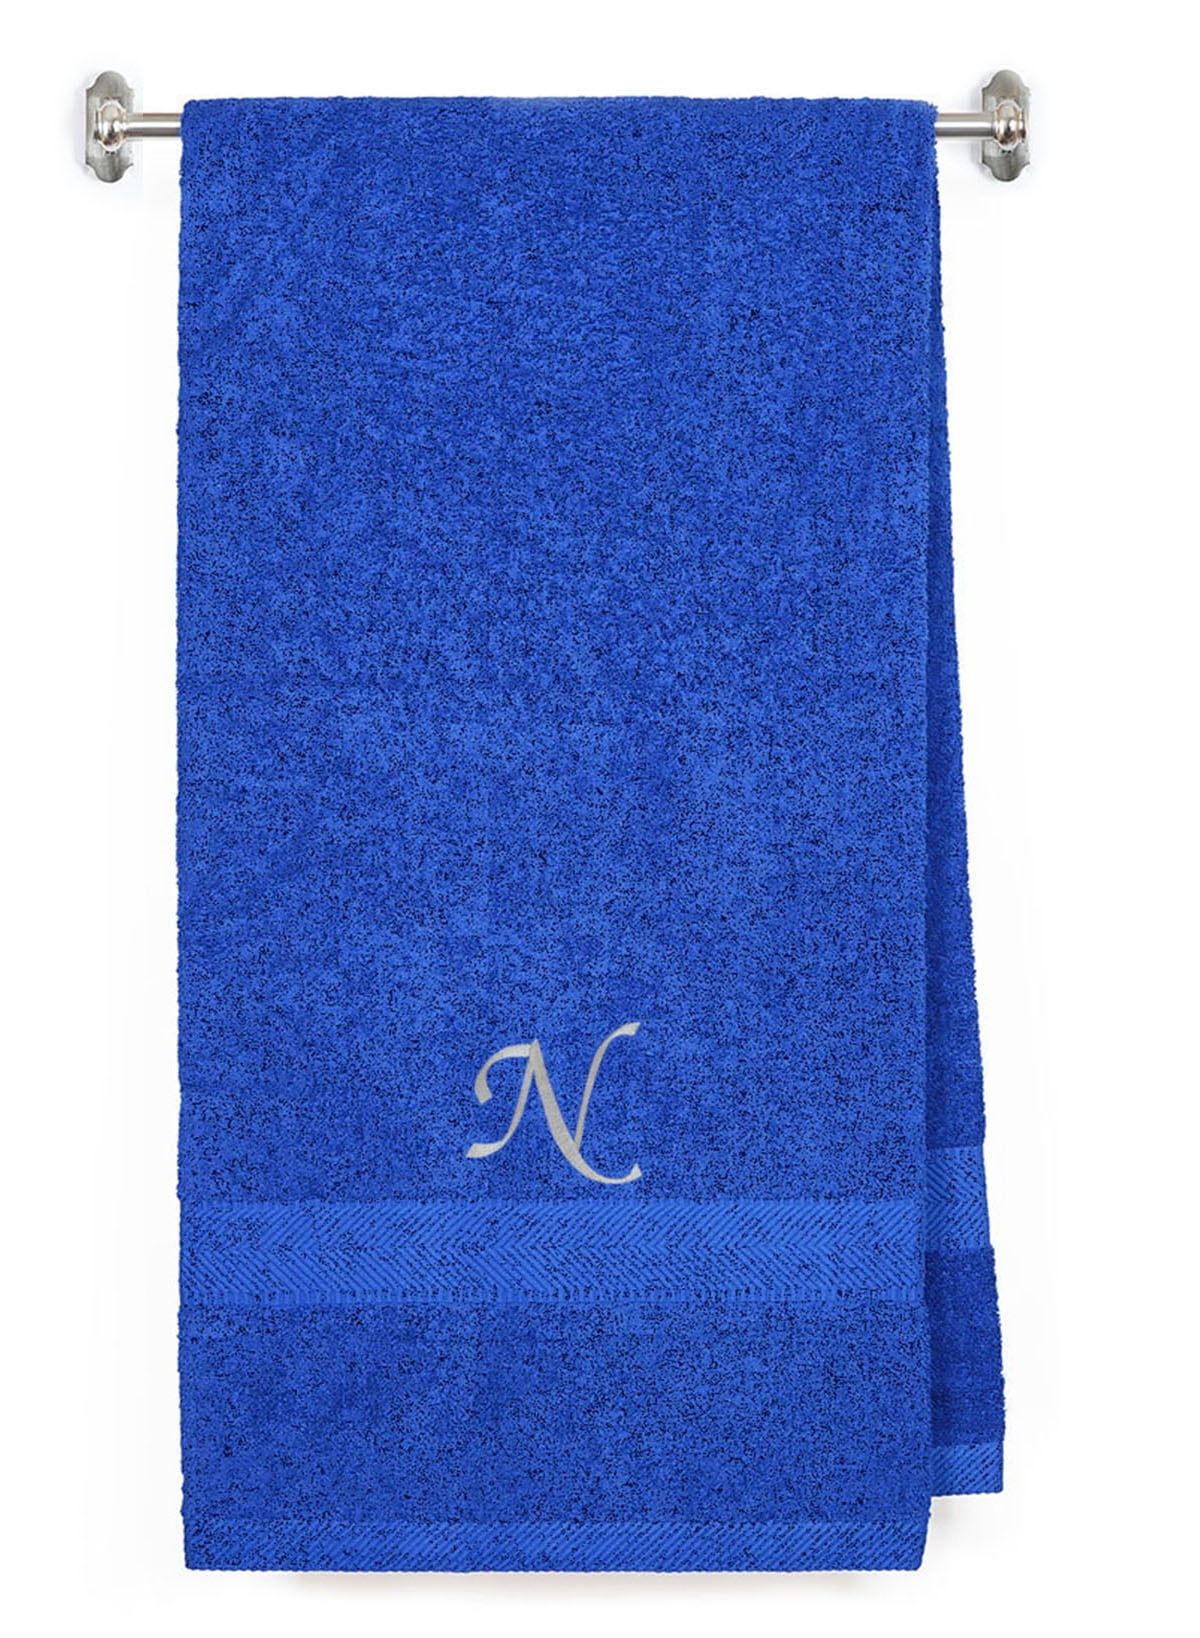 Embroidered Terry Cotton Bath Towel for Bath, Shower ...